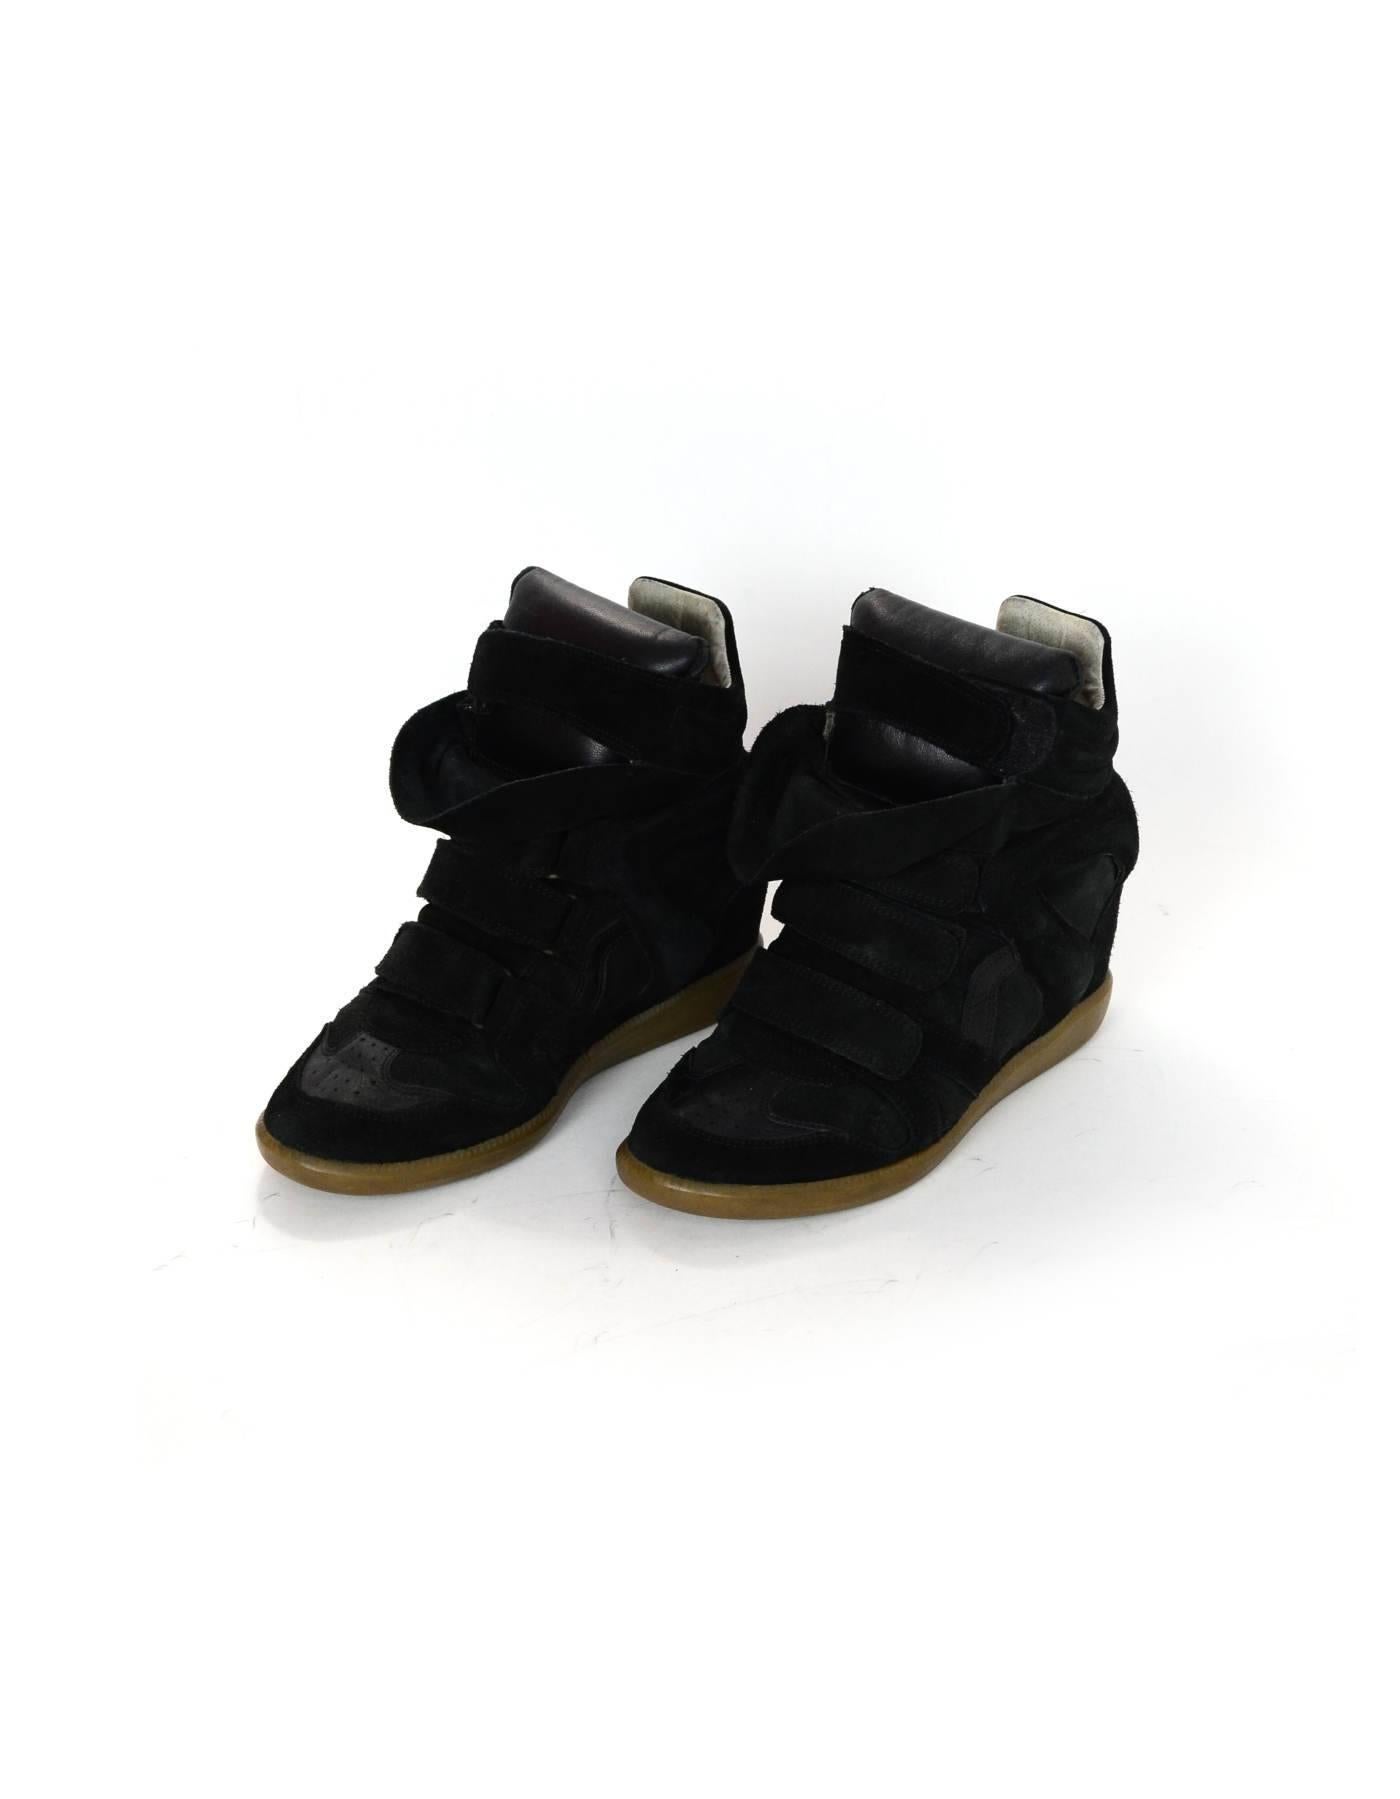 Isabel Black Leather & Suede Beckett Sneakers Sz 39

Color: Black
Materials: Leather, suede
Closure/Opening: Velcro closure
Sole Stamp: Isabel Marant 39
Retail Price: $695+ tax
Overall Condition: Very good pre-owned condition with the exception of